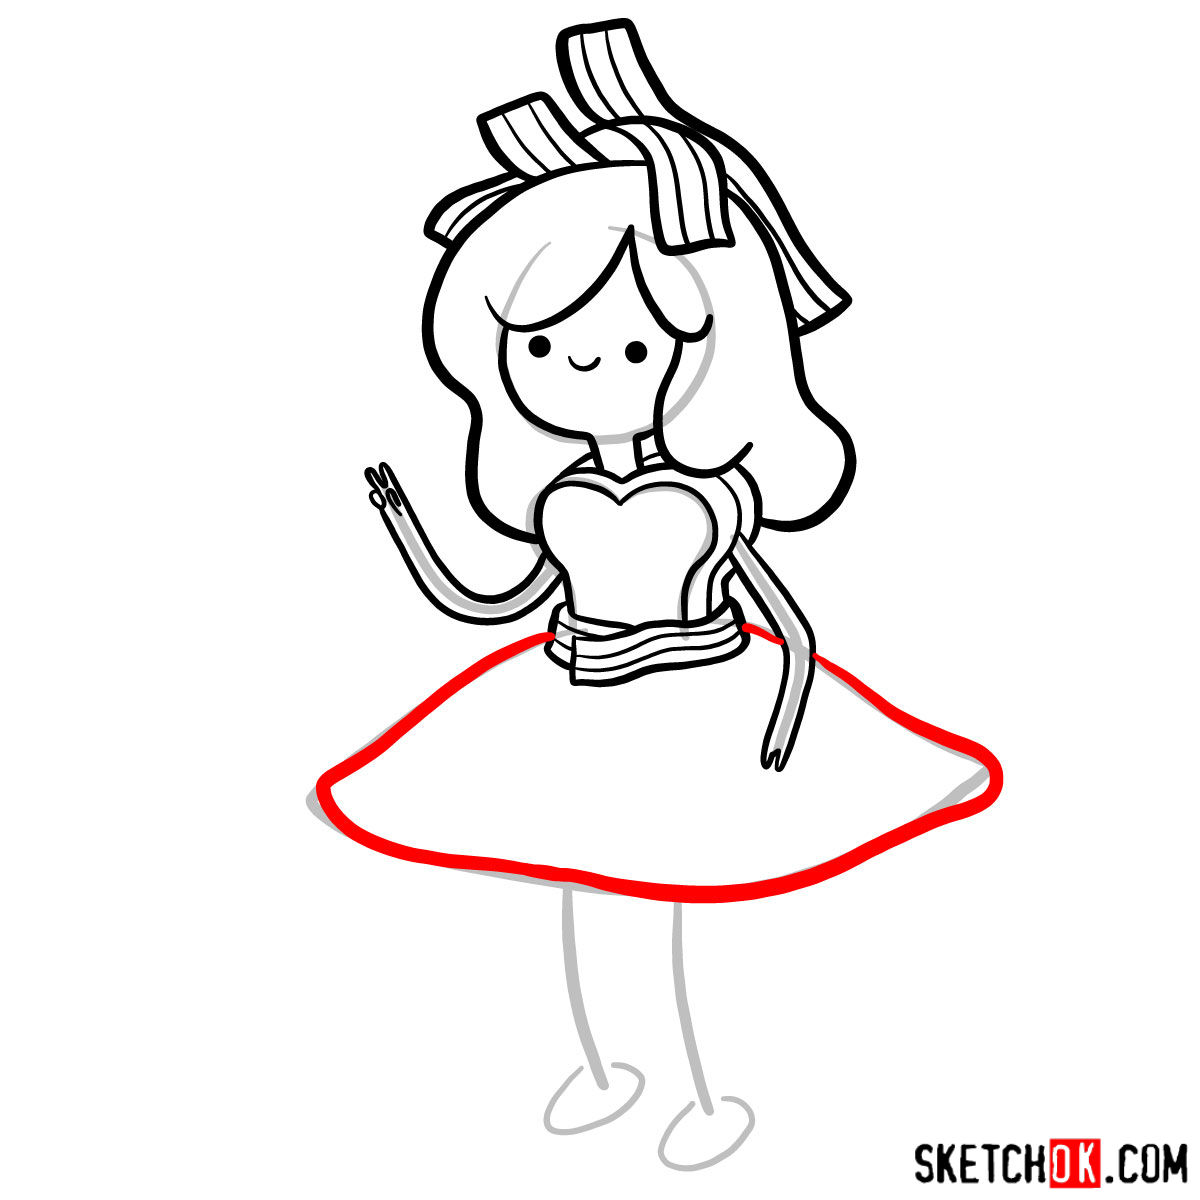 How to draw Breakfast Princess from Adventure Time - step 10